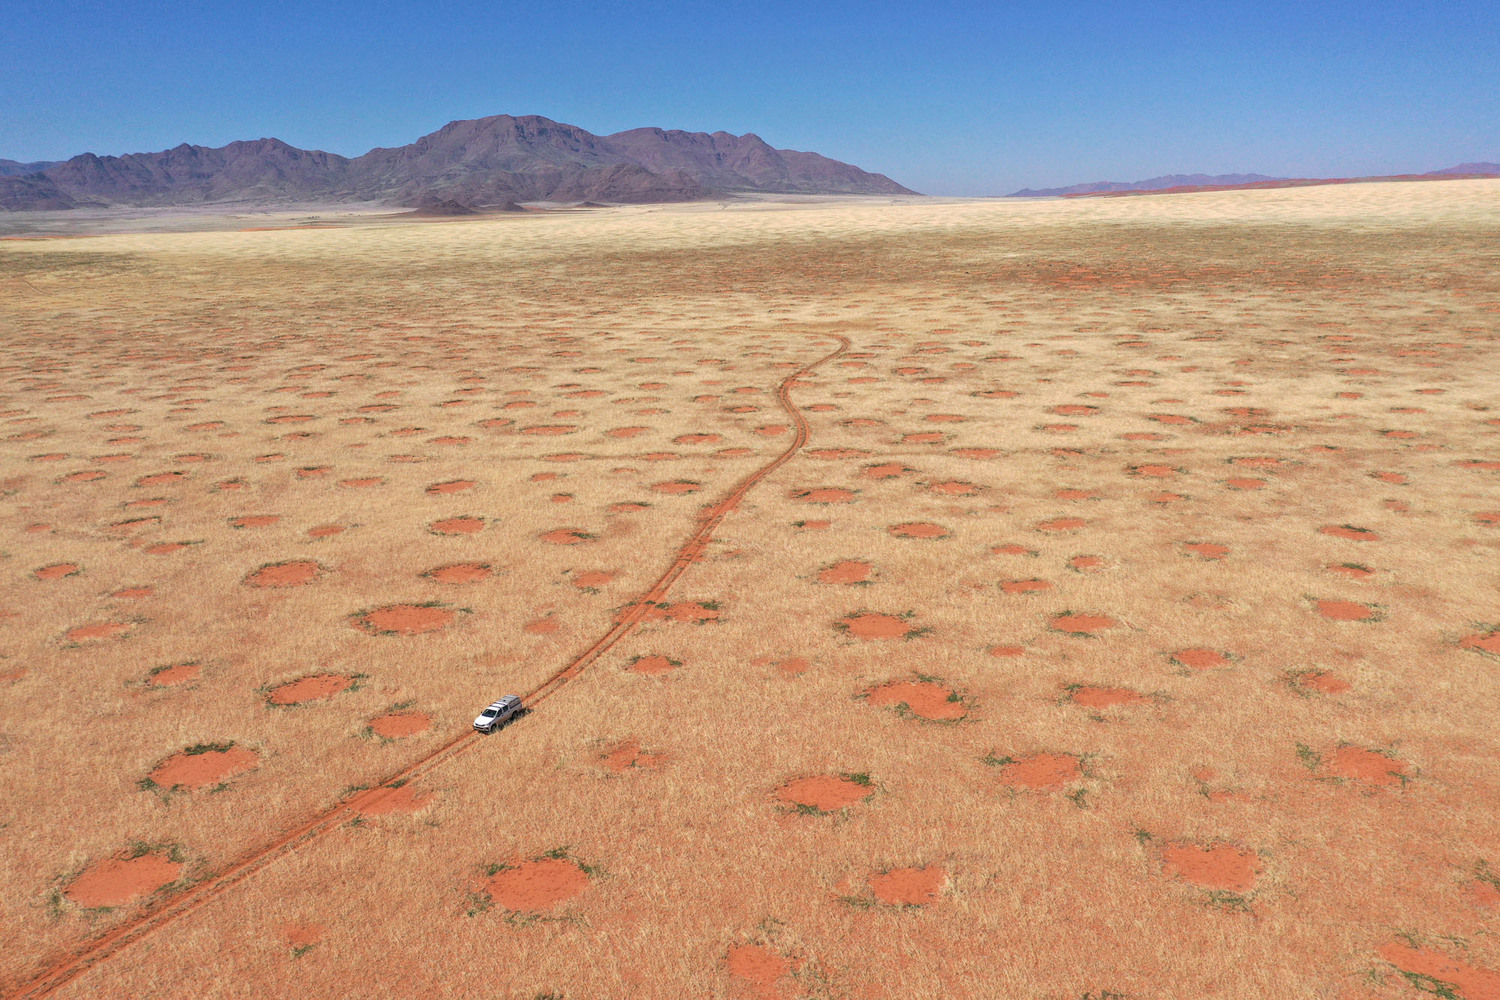 Drone image of car driving through the NamibRand Nature Reserve, one of the fairy-circle regions in Namibia where the researchers undertook grass excavations, soil-moisture and infiltration measurements (April 2022).